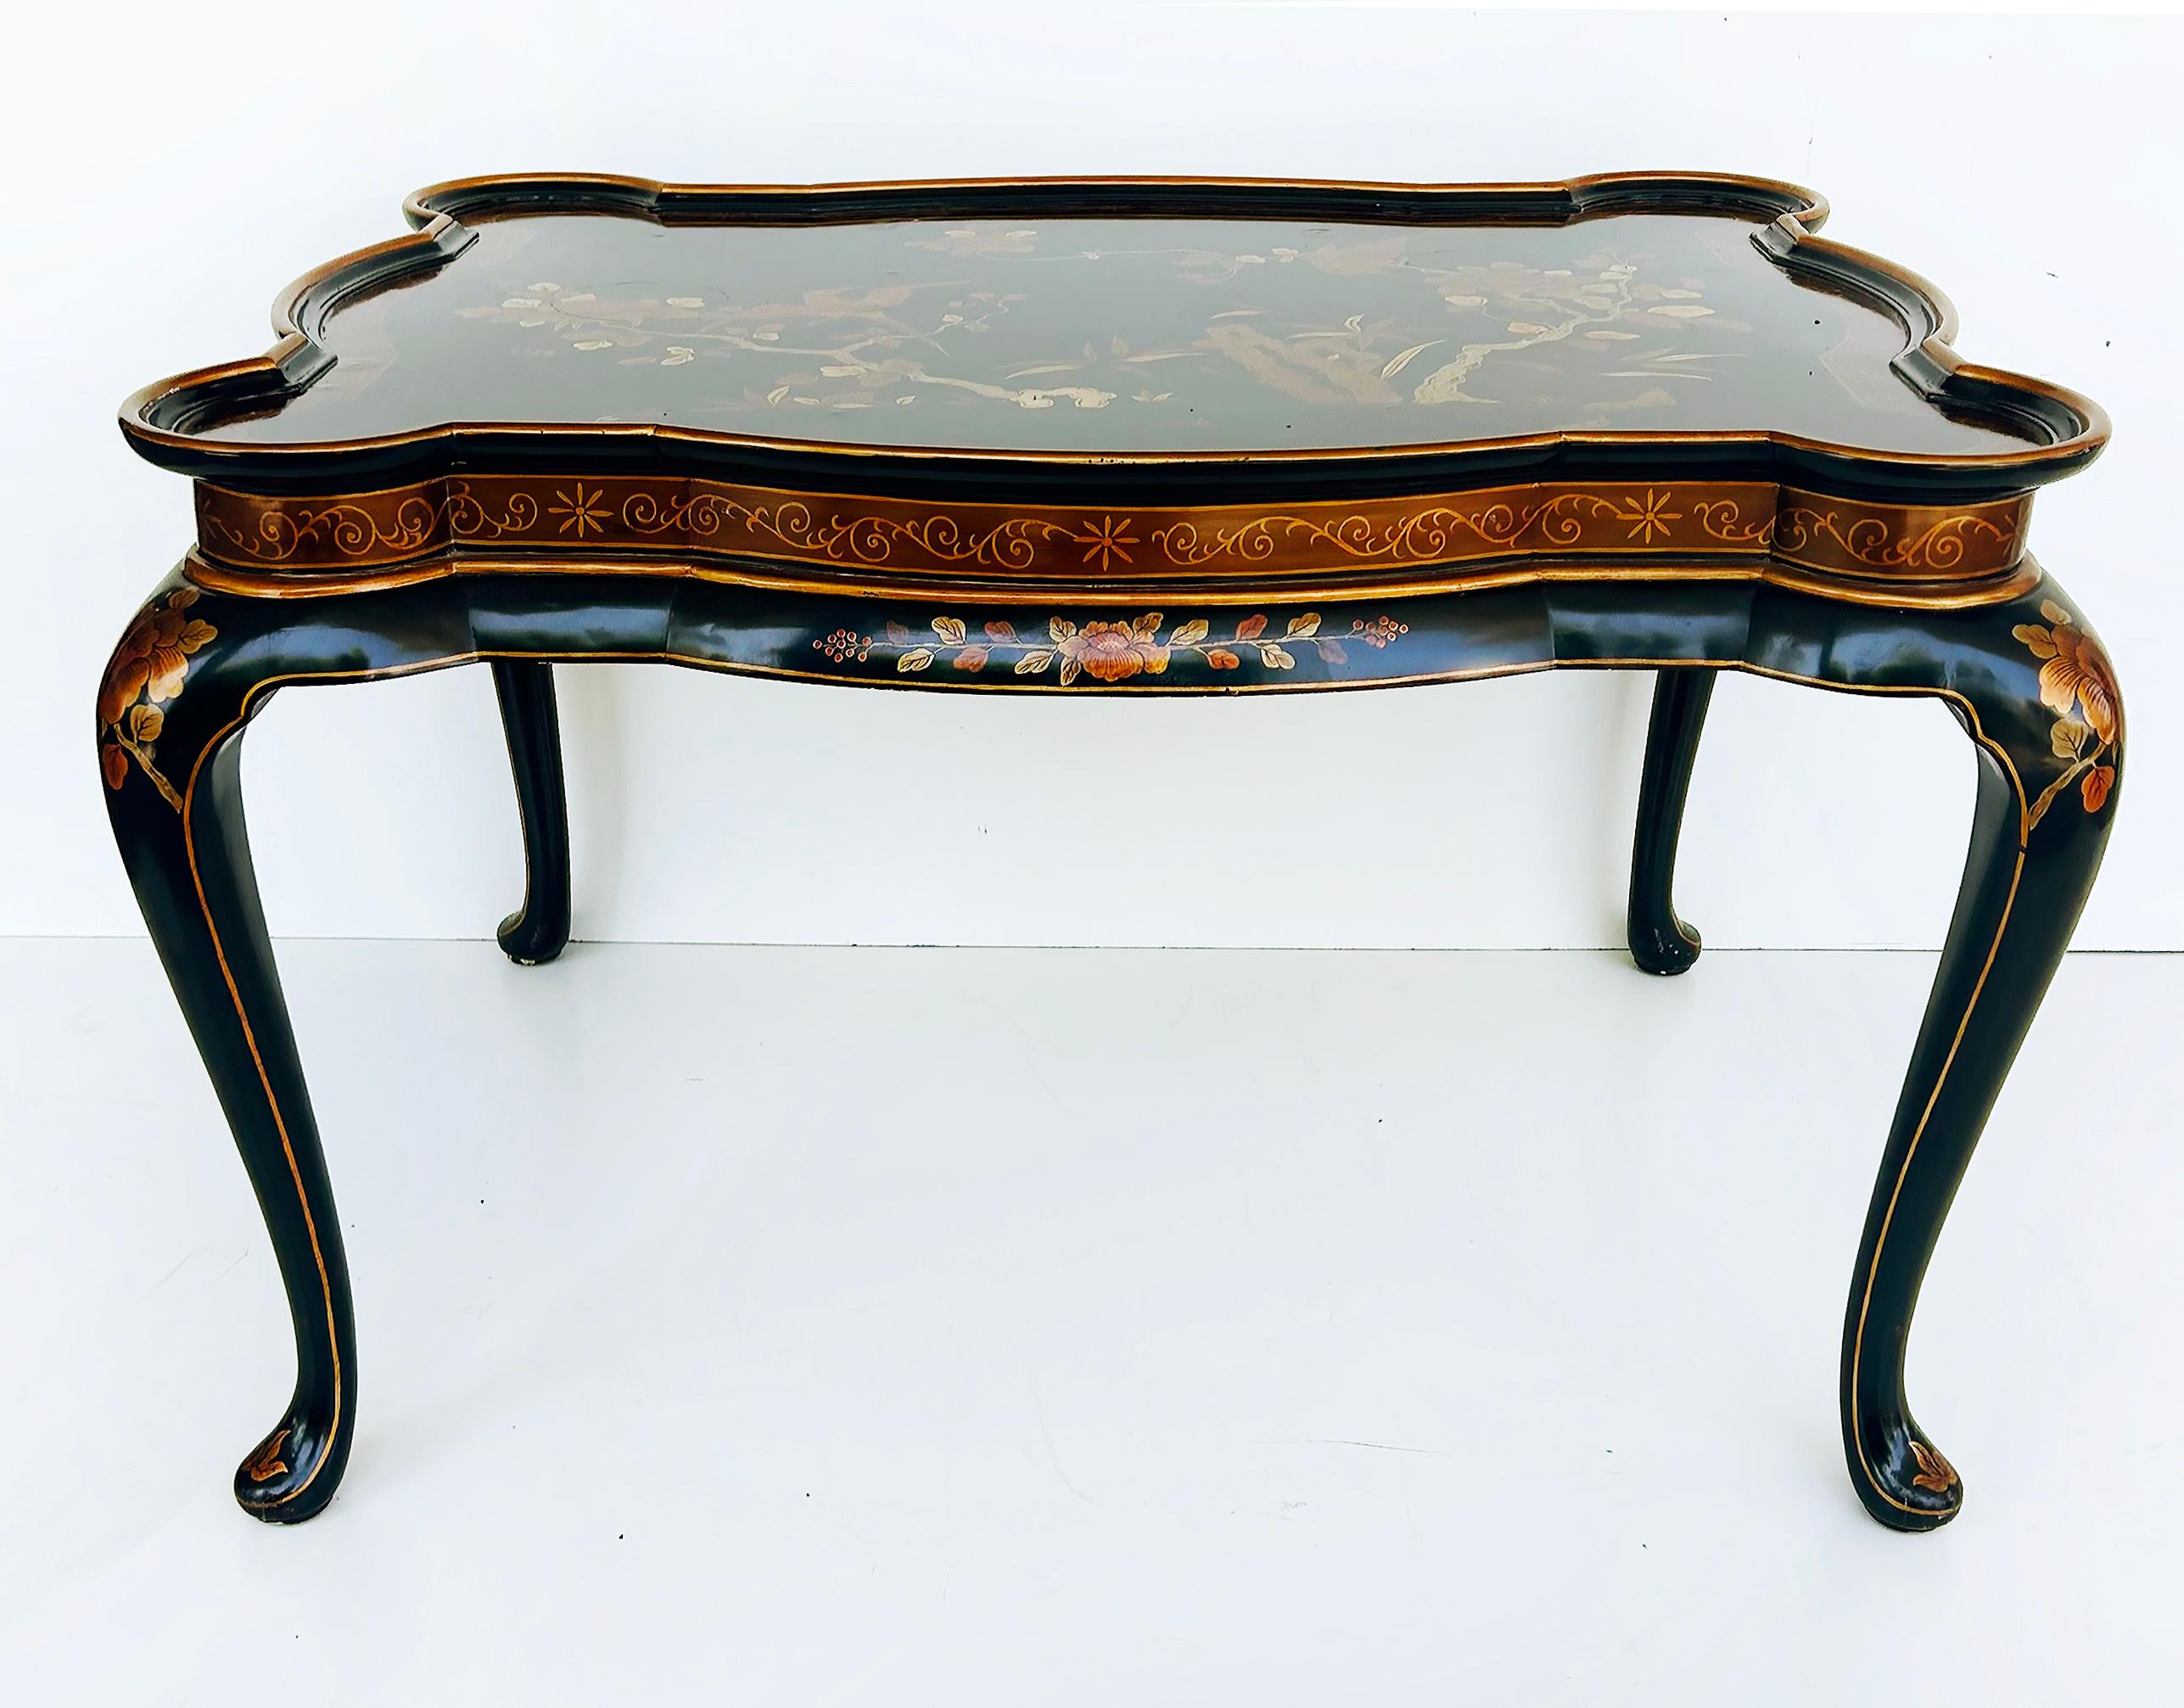 Maitland-Smith Chinoiserie Style Coffee Cocktail Table, Hand-Painted 

Offered for sale is a Maitland-Smith Ltd. hand-painted and gilt chinoiserie-style scalloped coffee/cocktail table. The top surface does show vintage wear that is difficult to